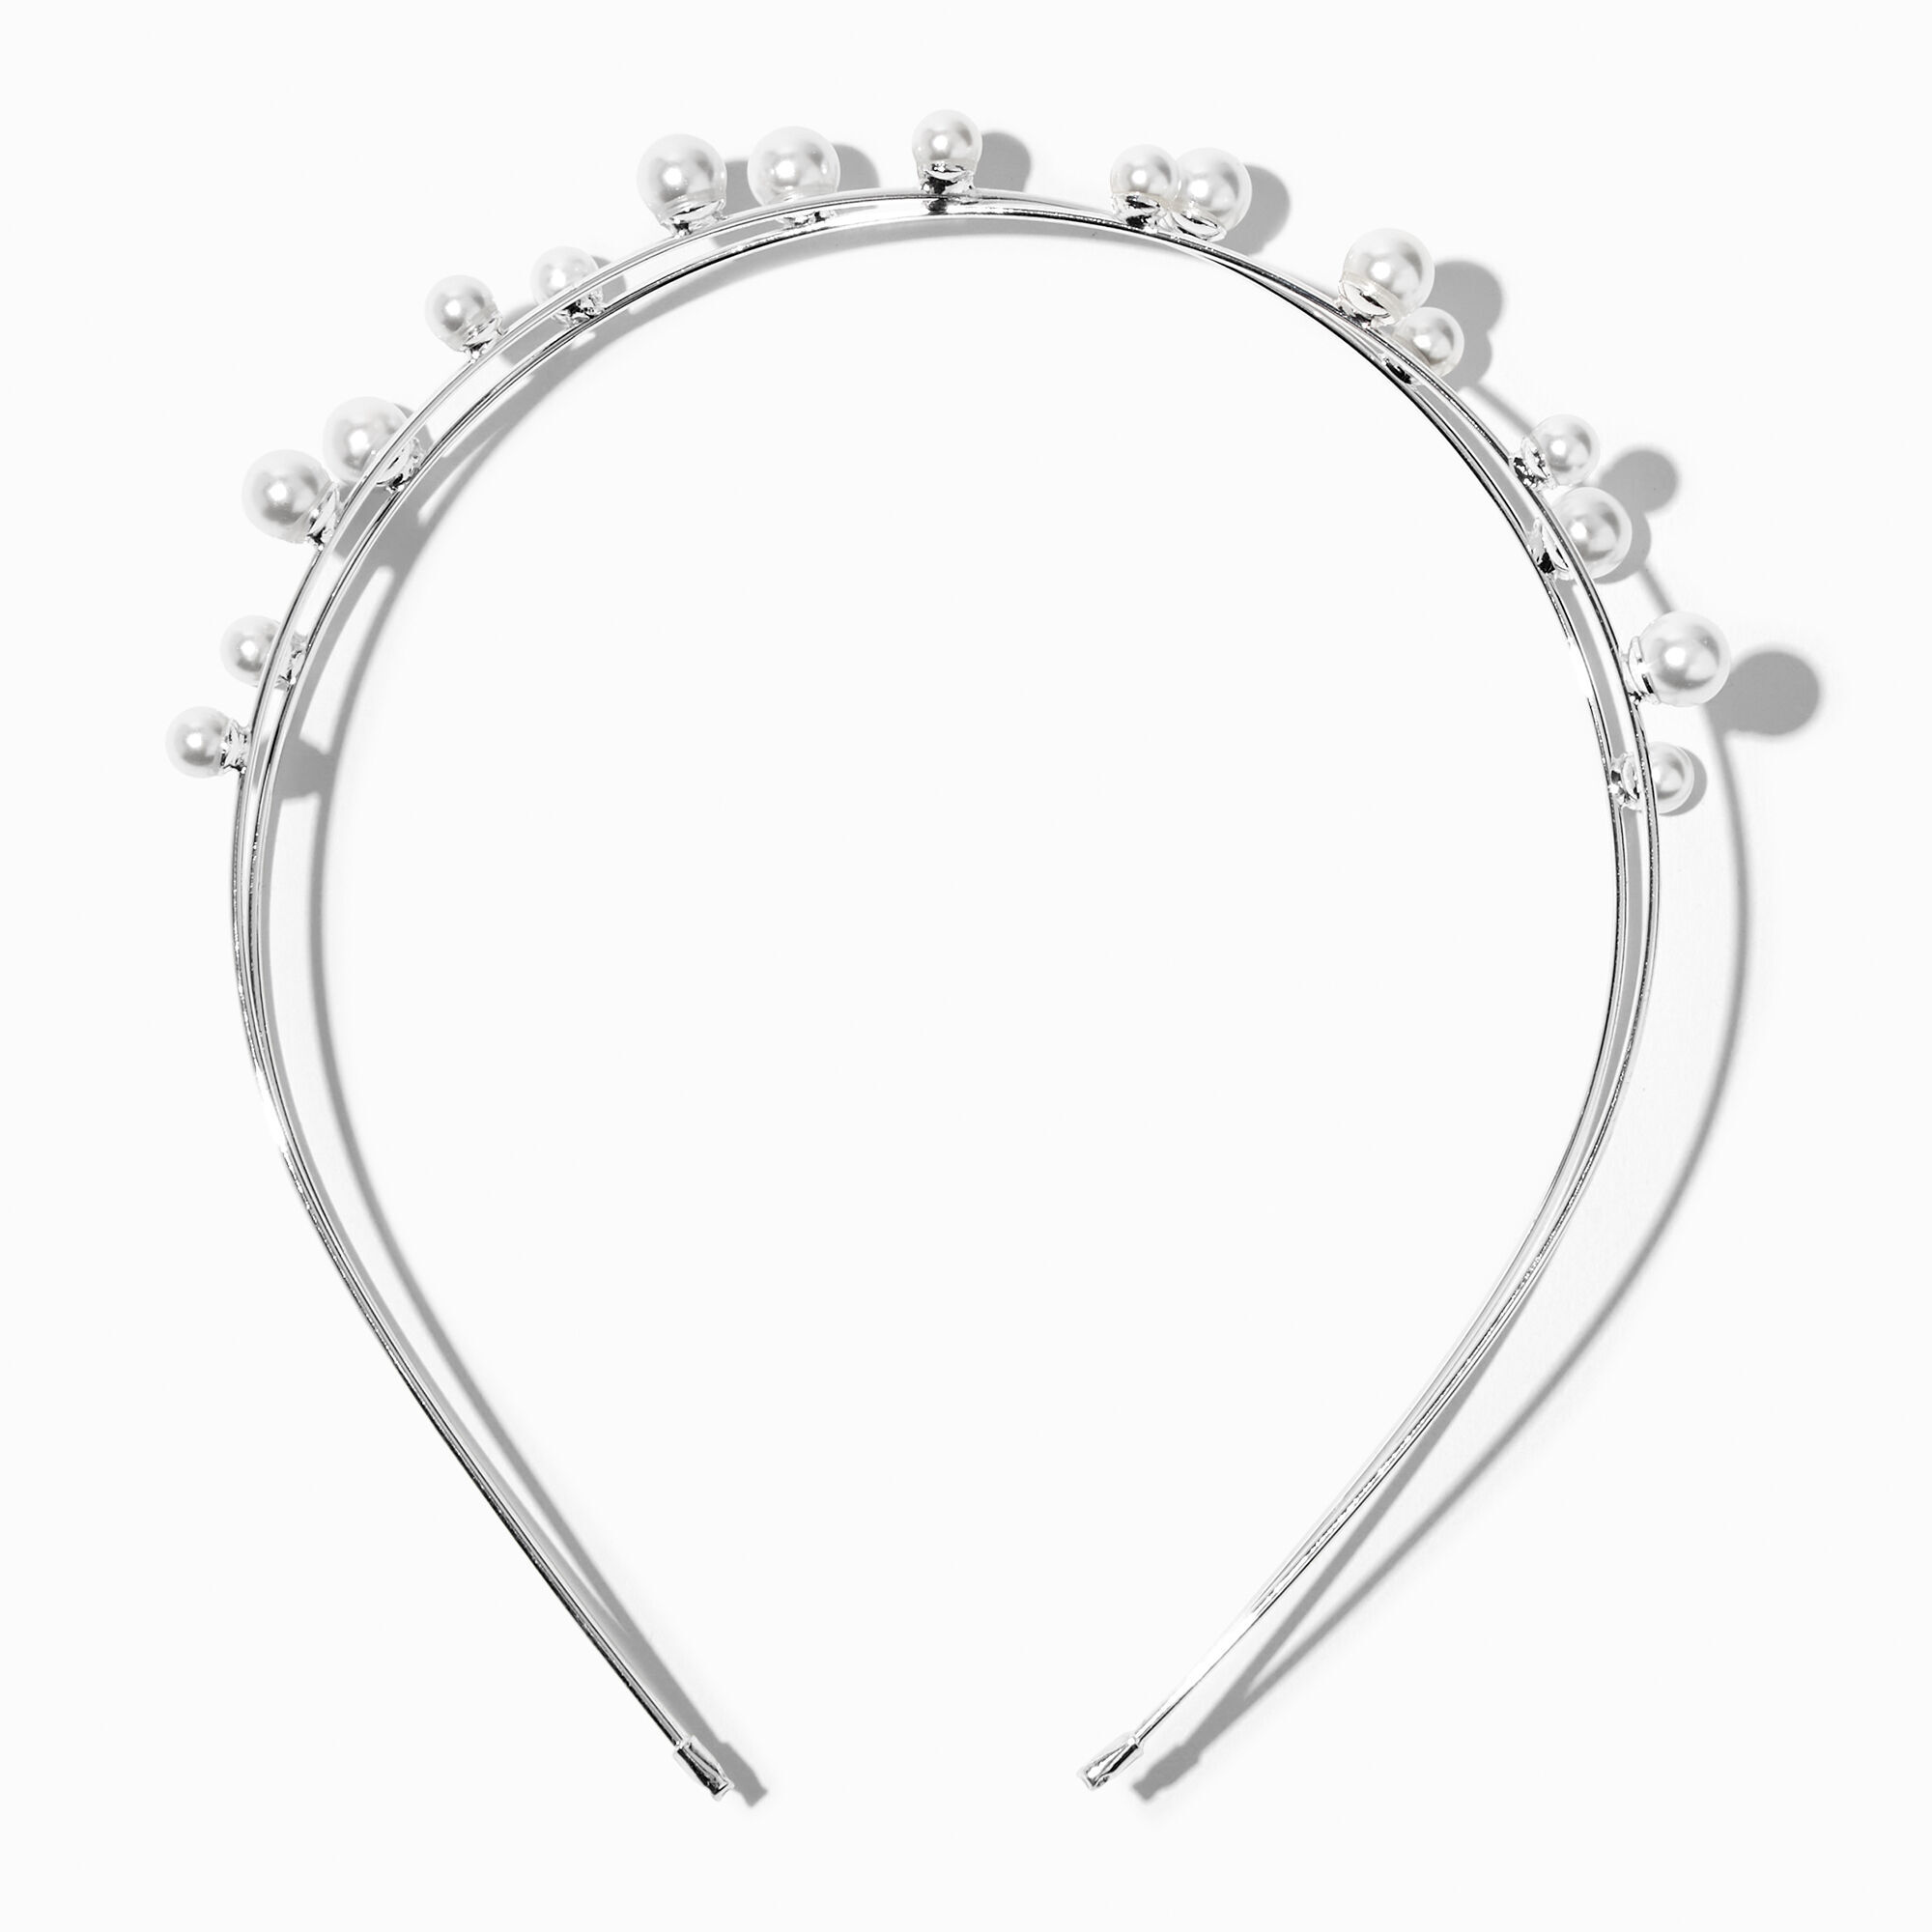 View Claires Tone CrissCross Pearl Two Row Headband Silver information